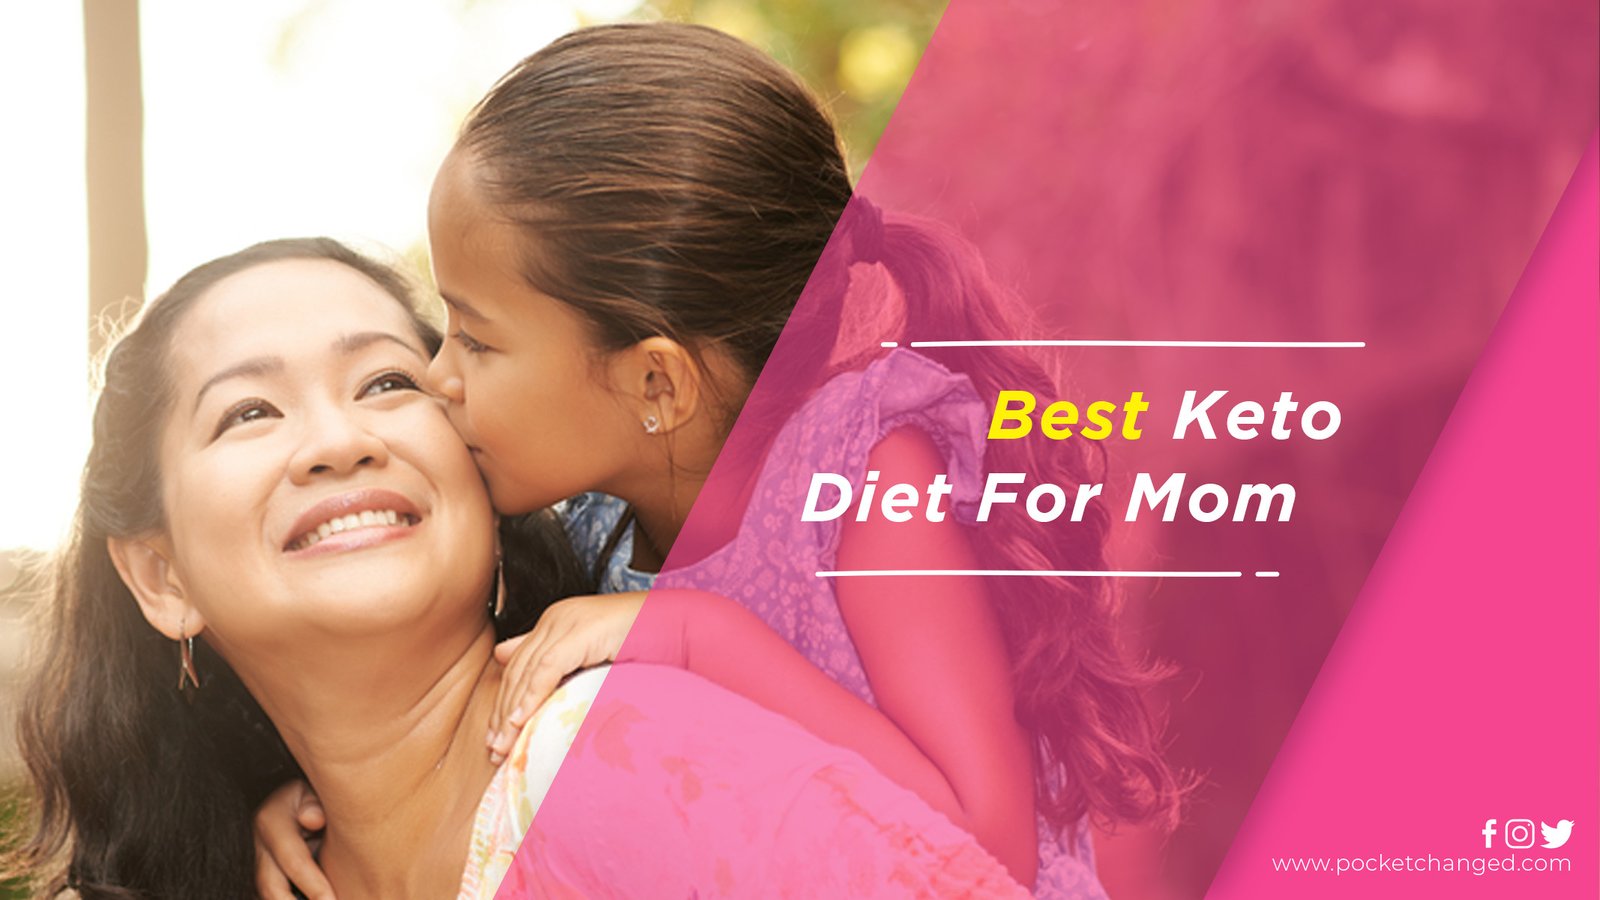 Best Keto Meal Plans For Nursing Mothers, That Won't Hurt Your Baby!